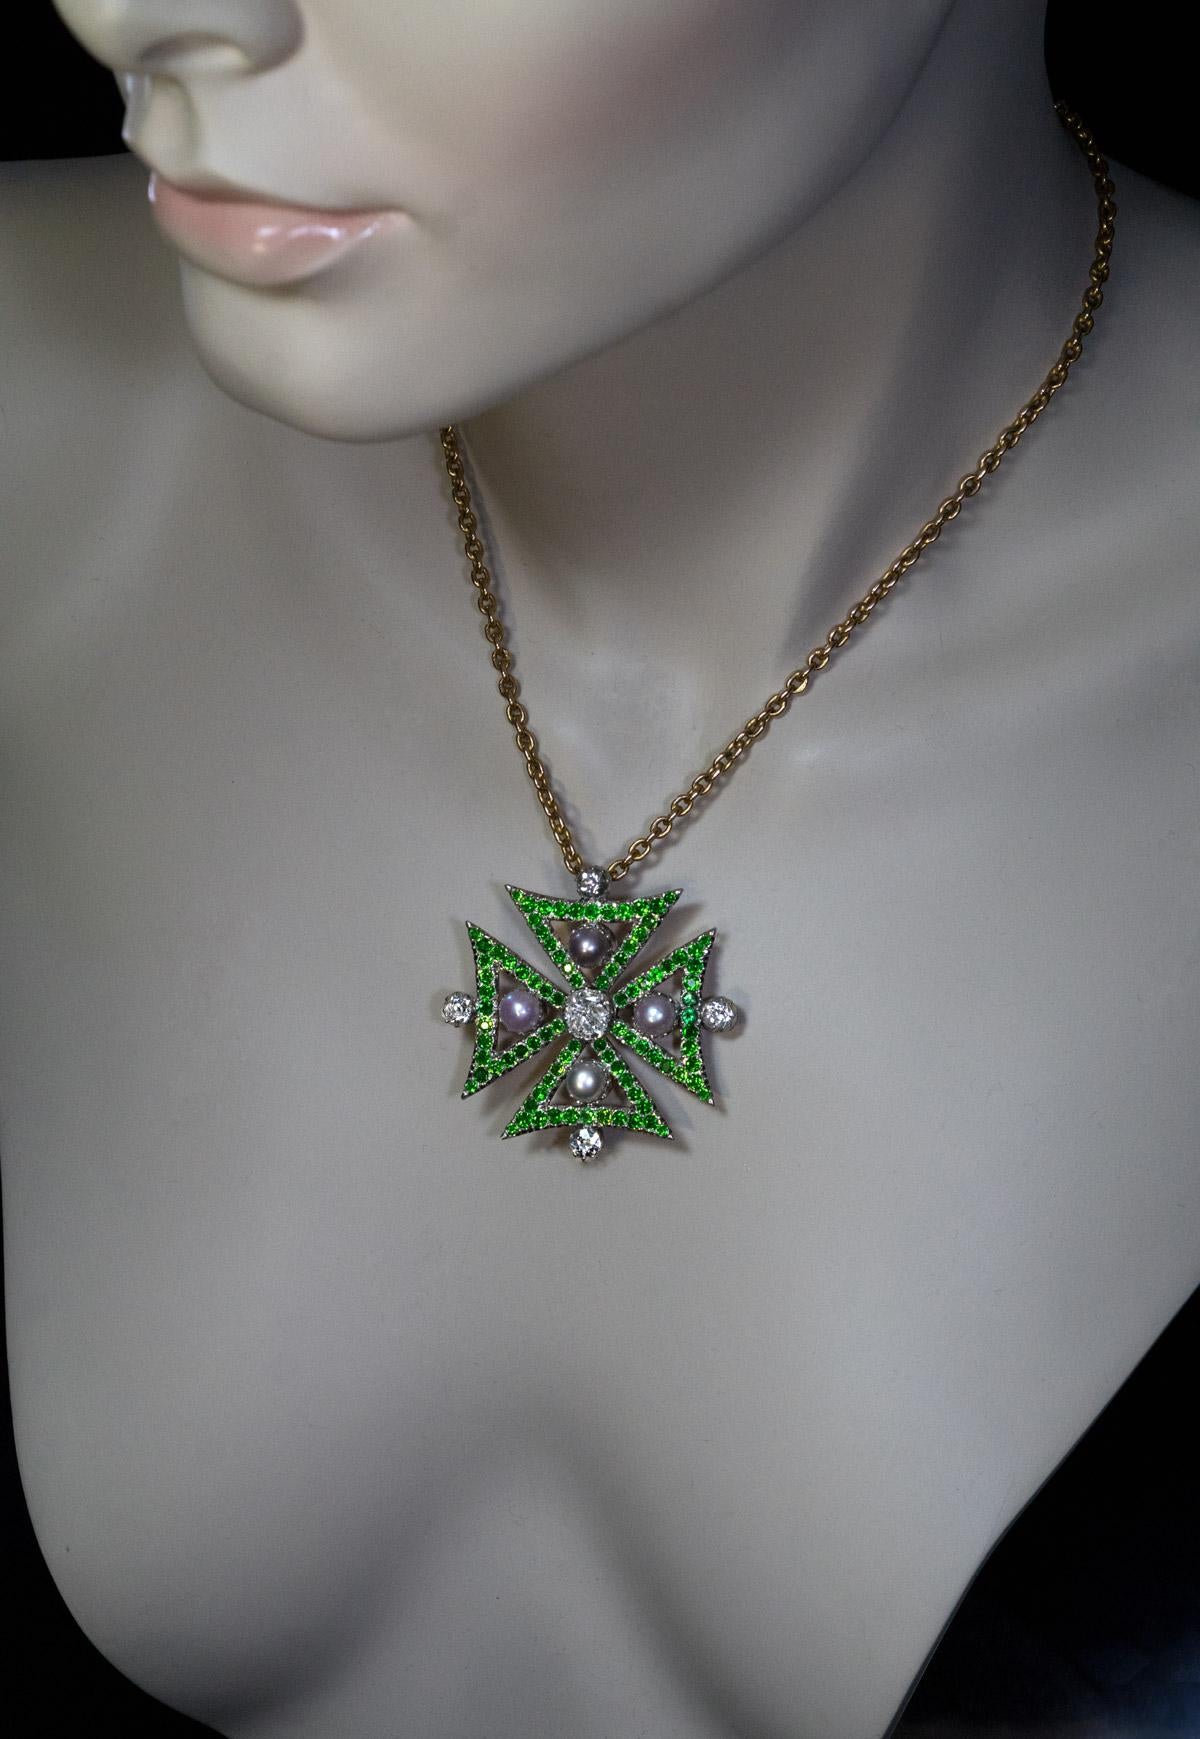 Circa 1880s

This magnificent Victorian era pendant / brooch is designed as a large Byzantine (frequently called Maltese) cross set with bright white diamonds, gray pearls, and vivid green Russian demantoid garnets. The cross is handcrafted in